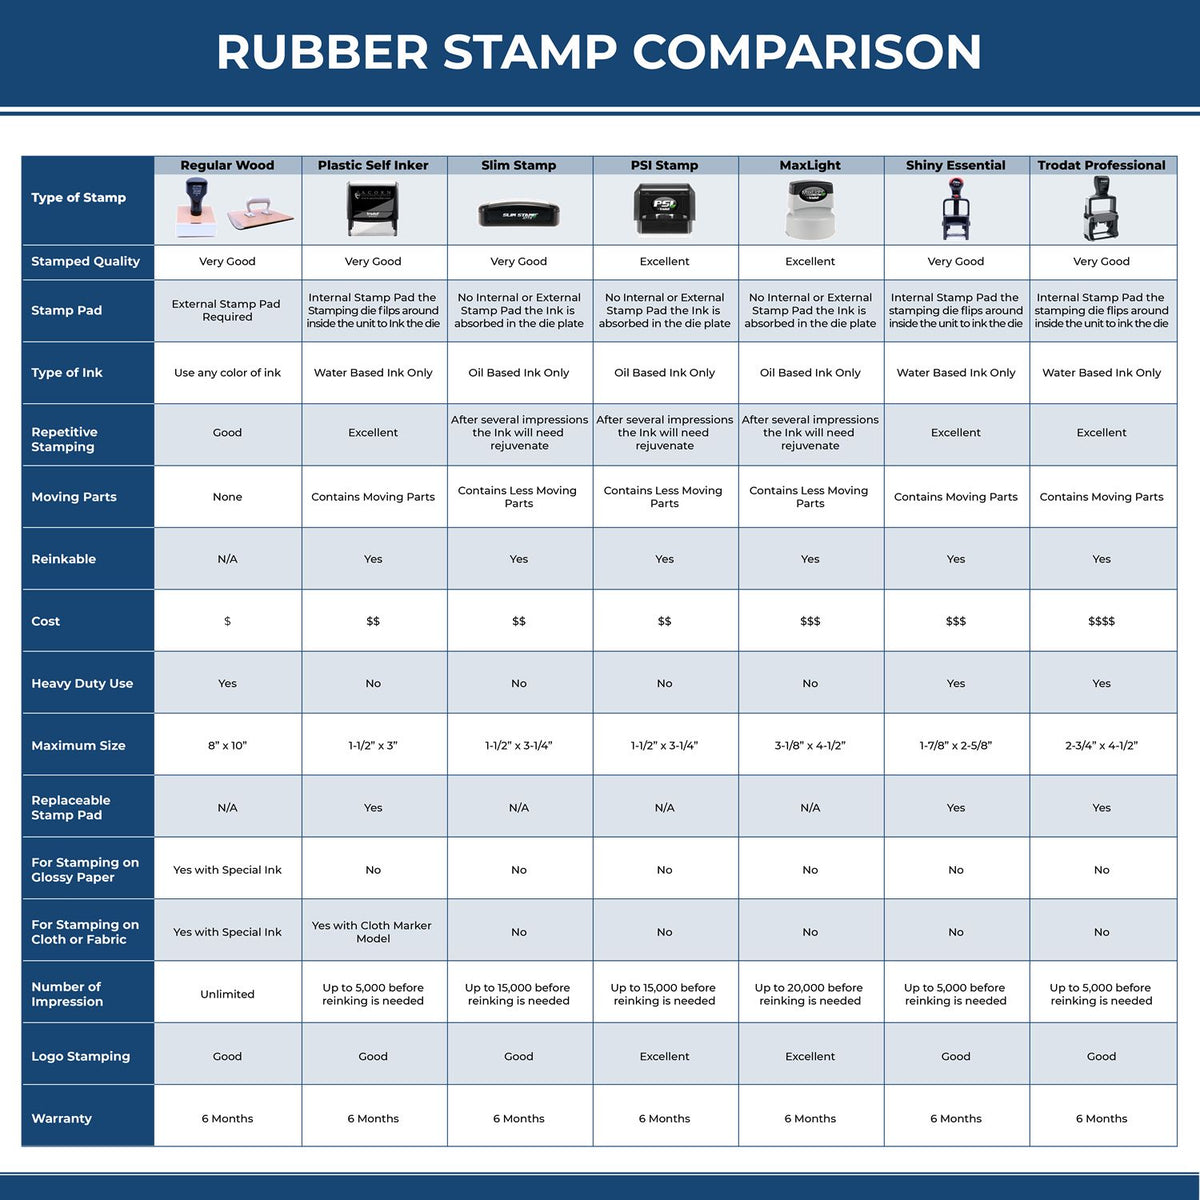 Large Self Inking Damages Stamp 4601S Rubber Stamp Comparison